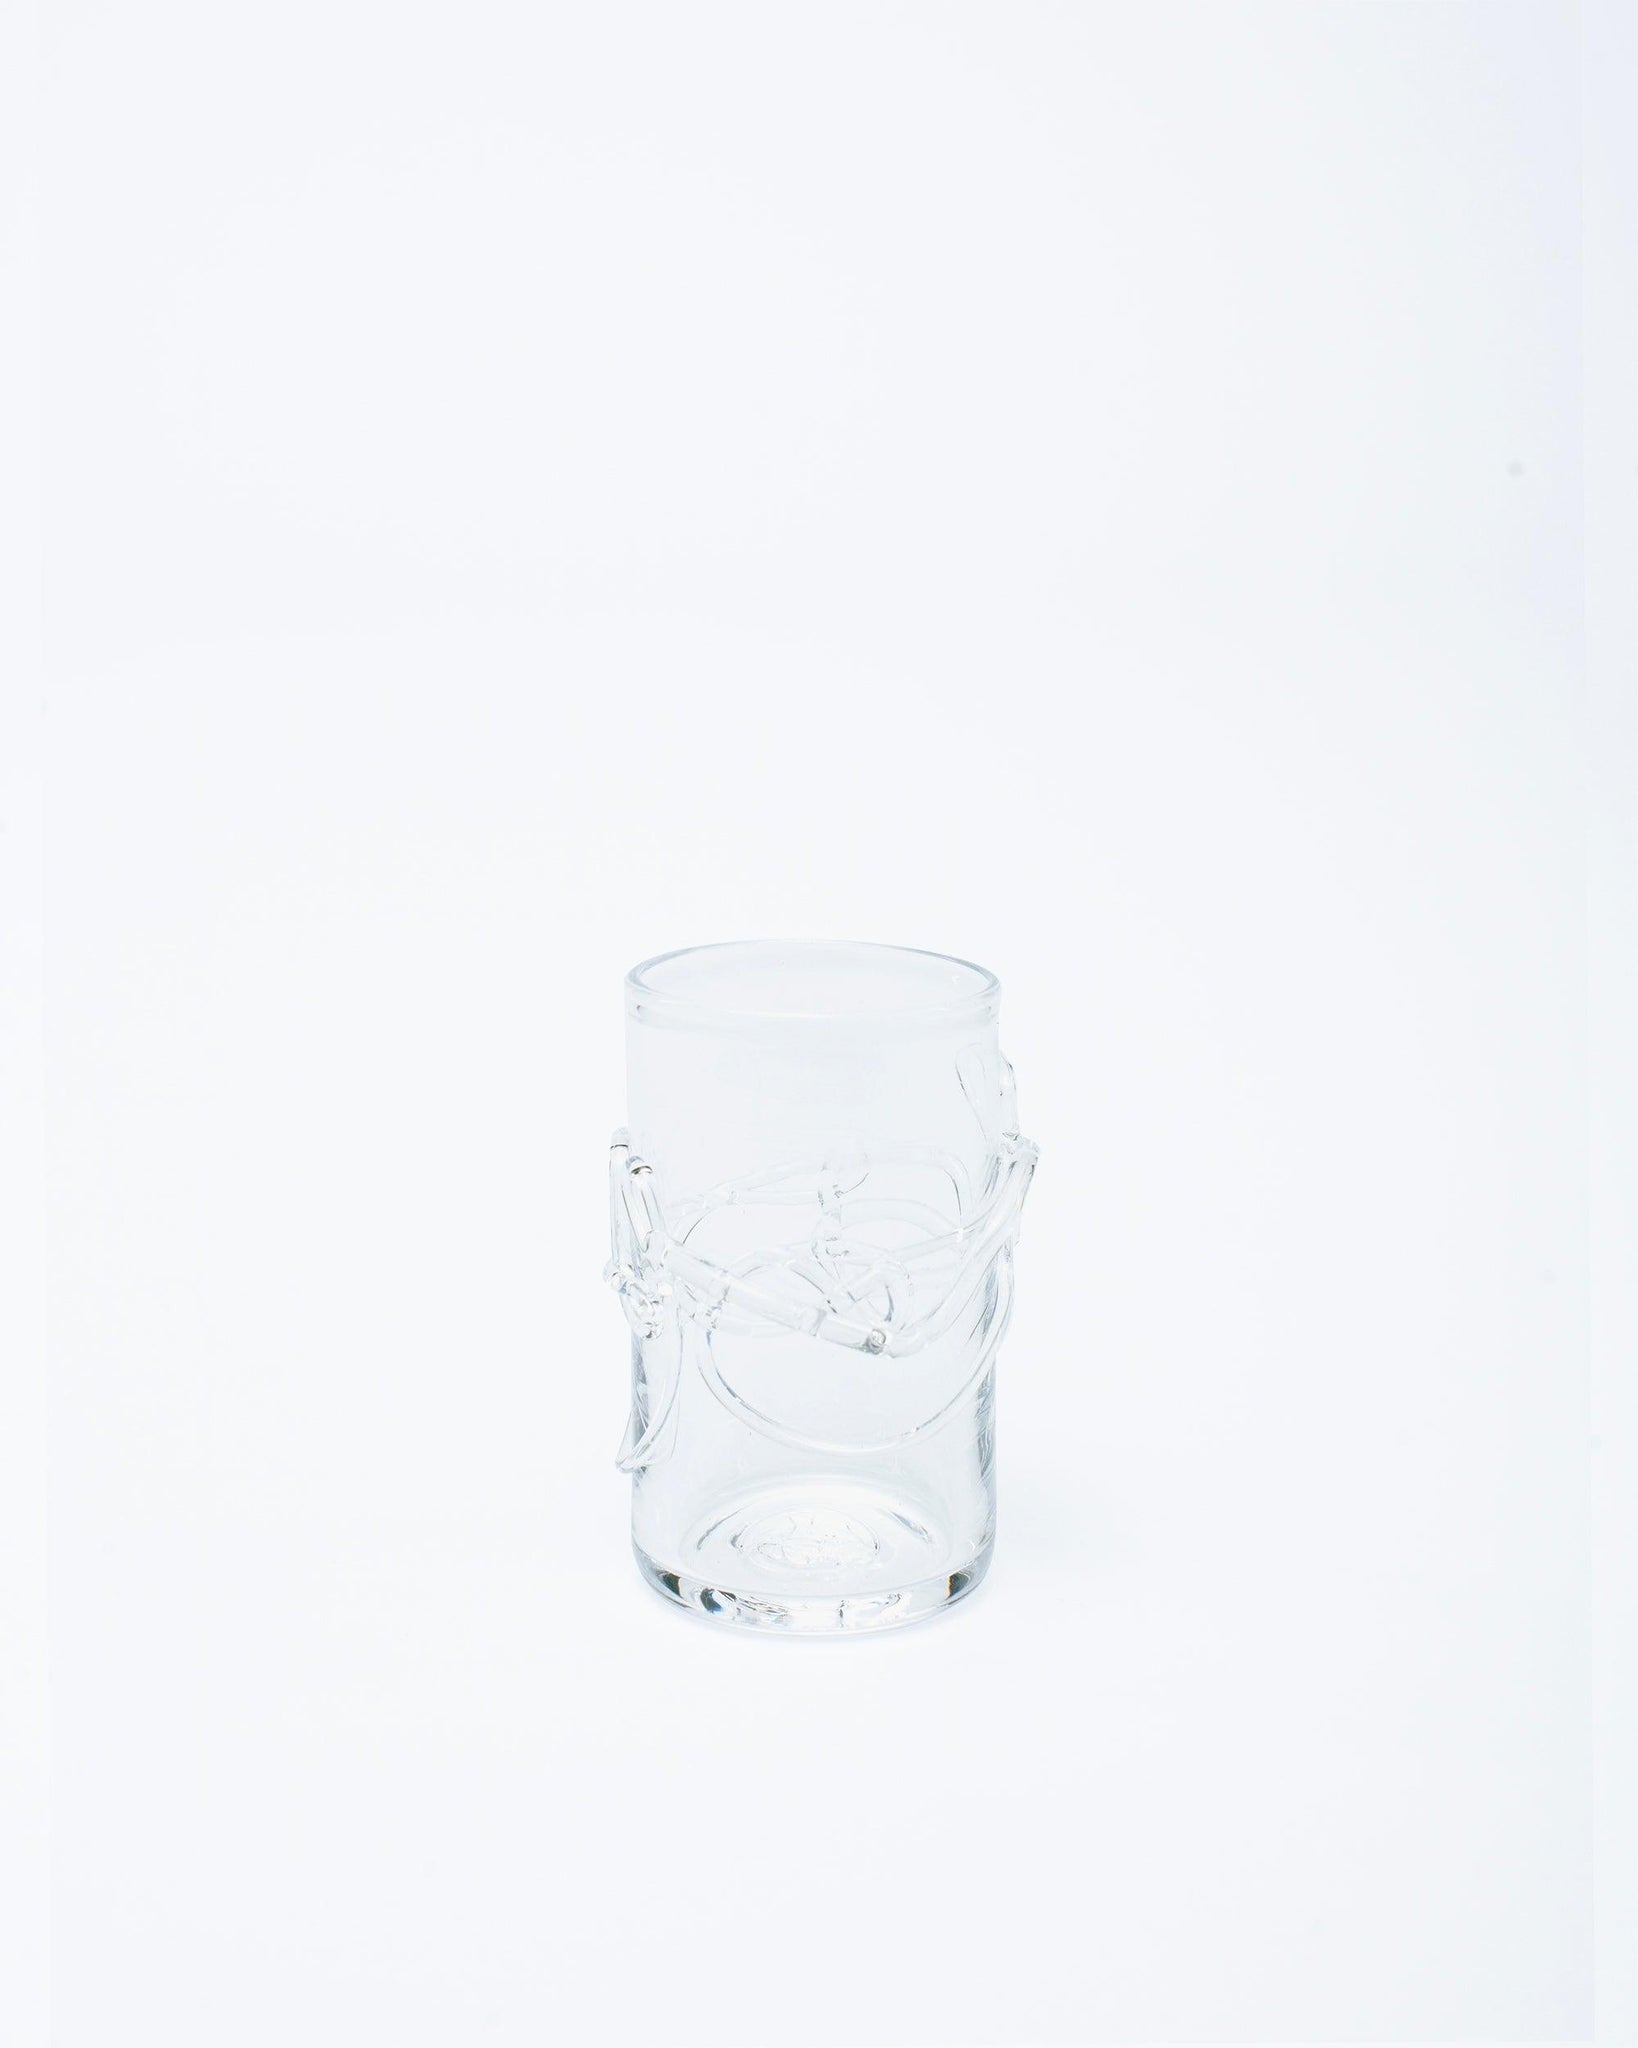 Hand blown glass with melted glass details on a white studio background